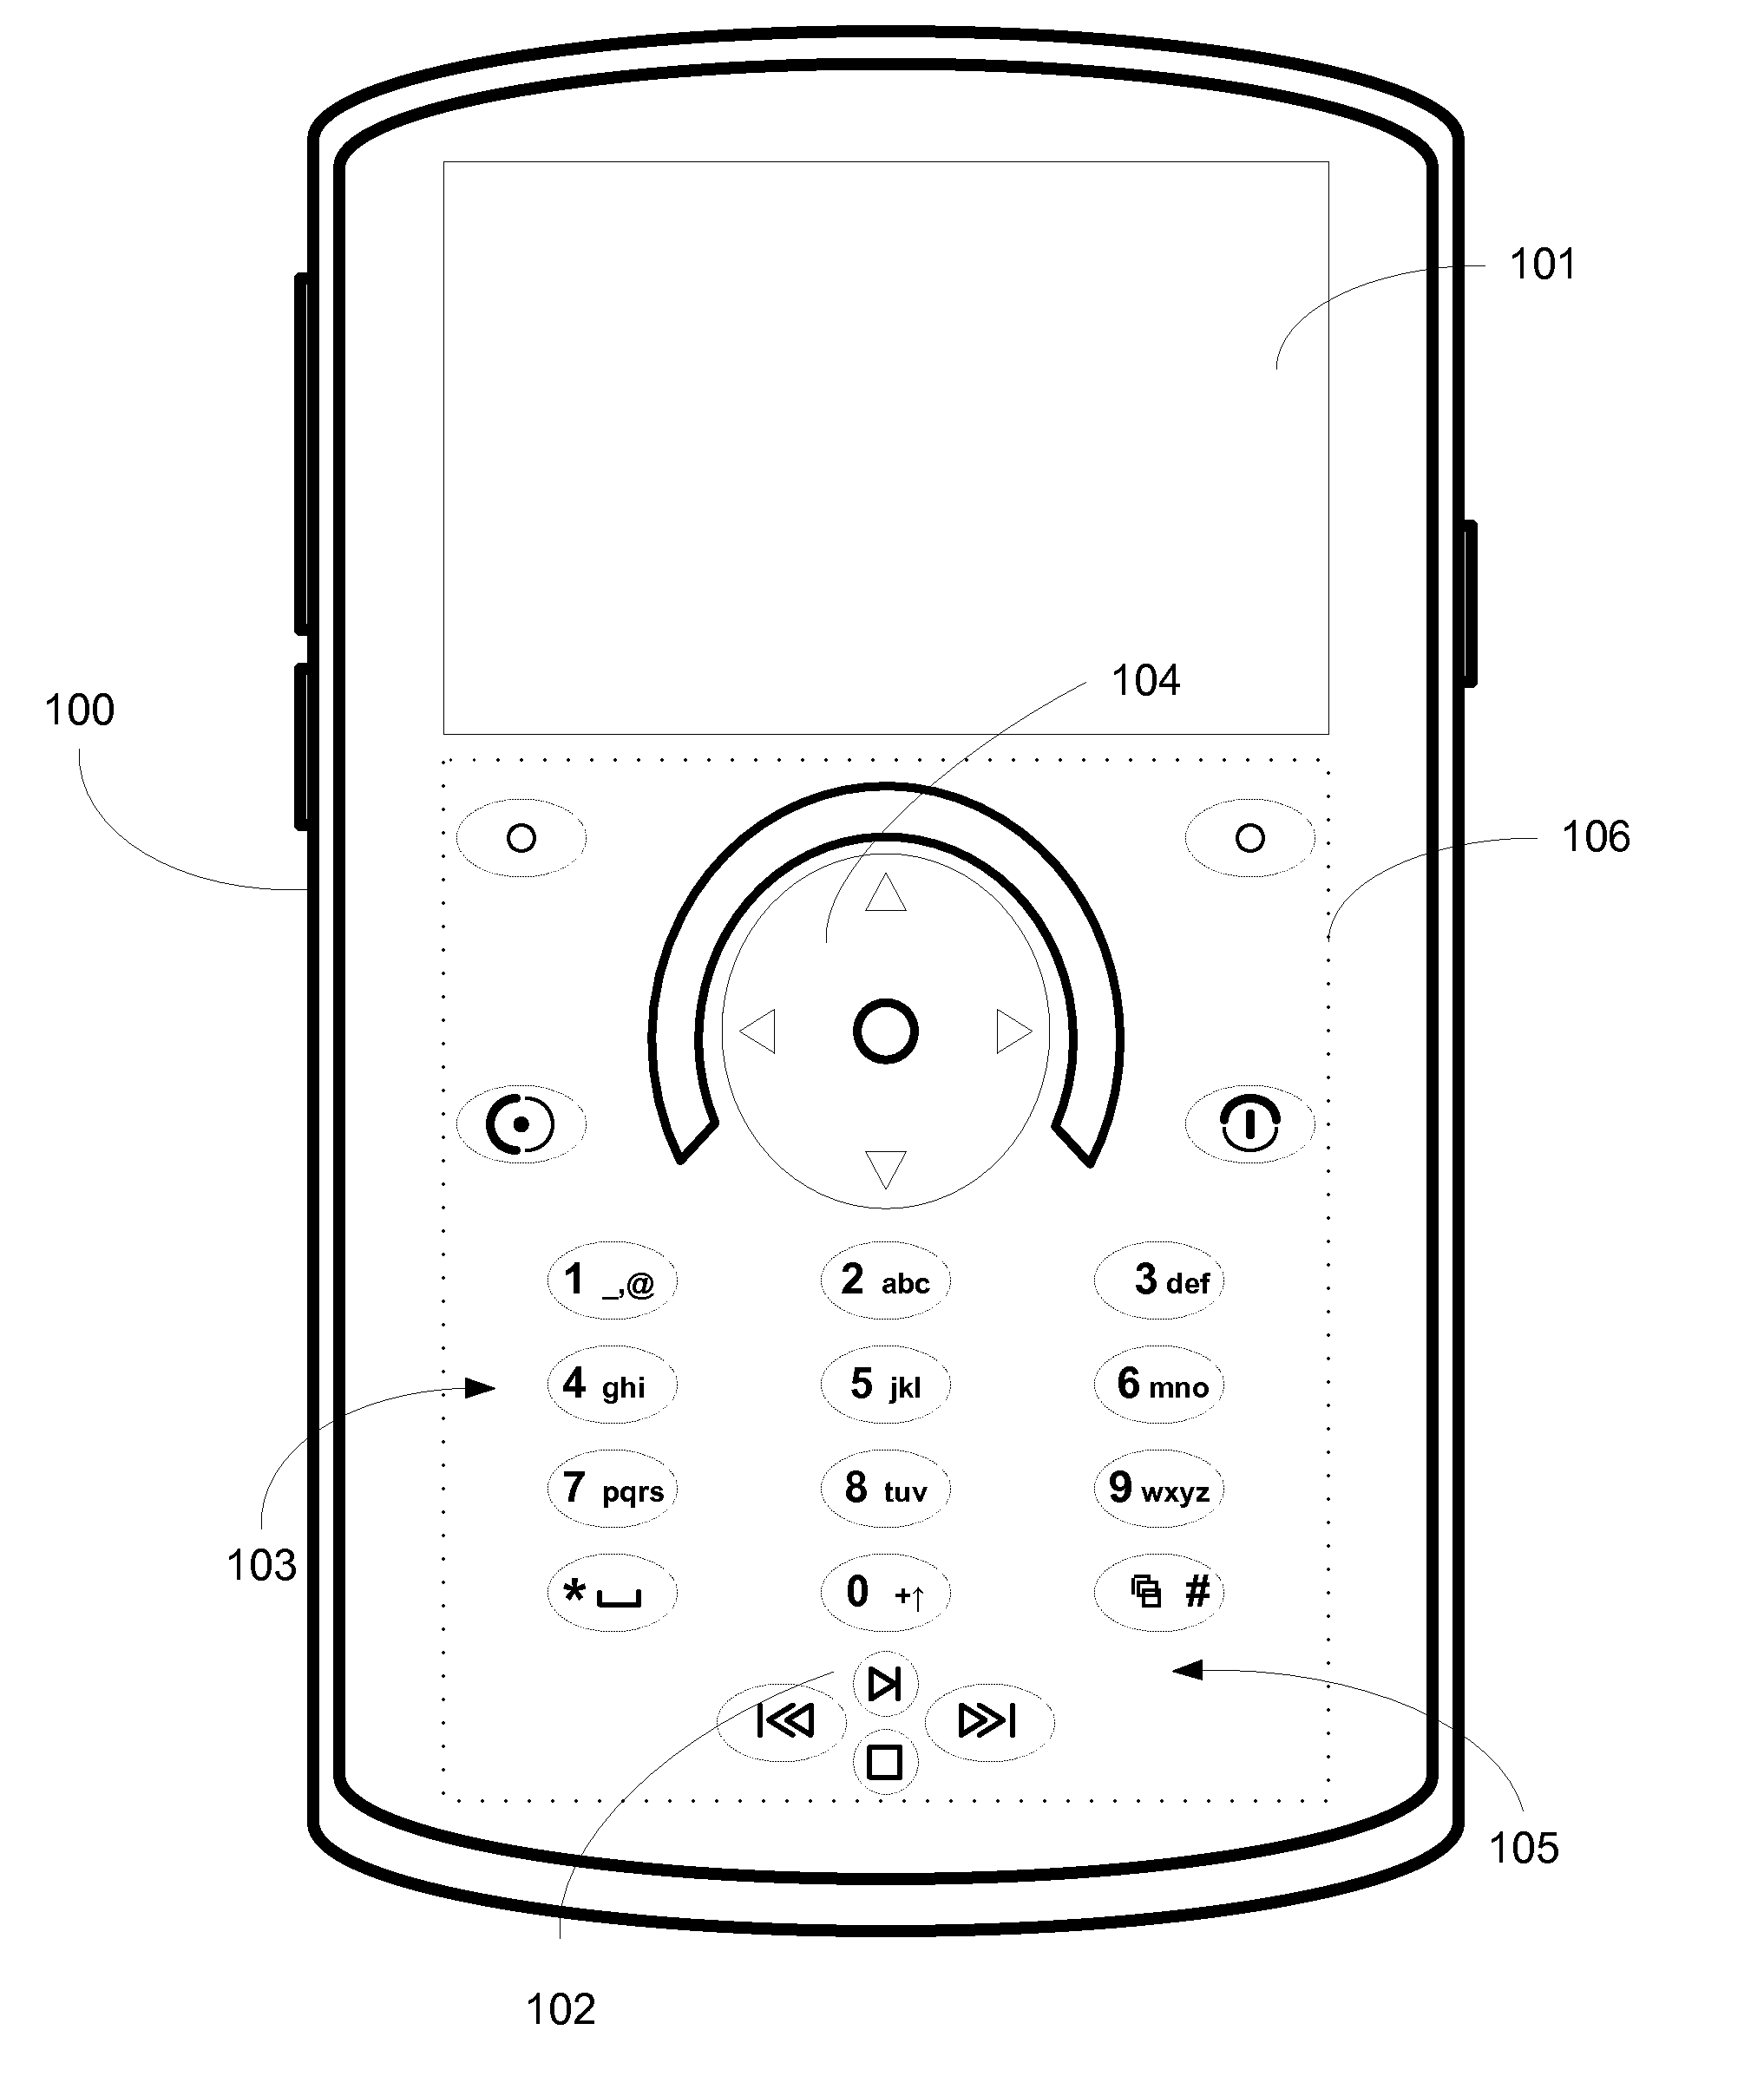 Segmented Electroluminescent Device for Morphing User Interface